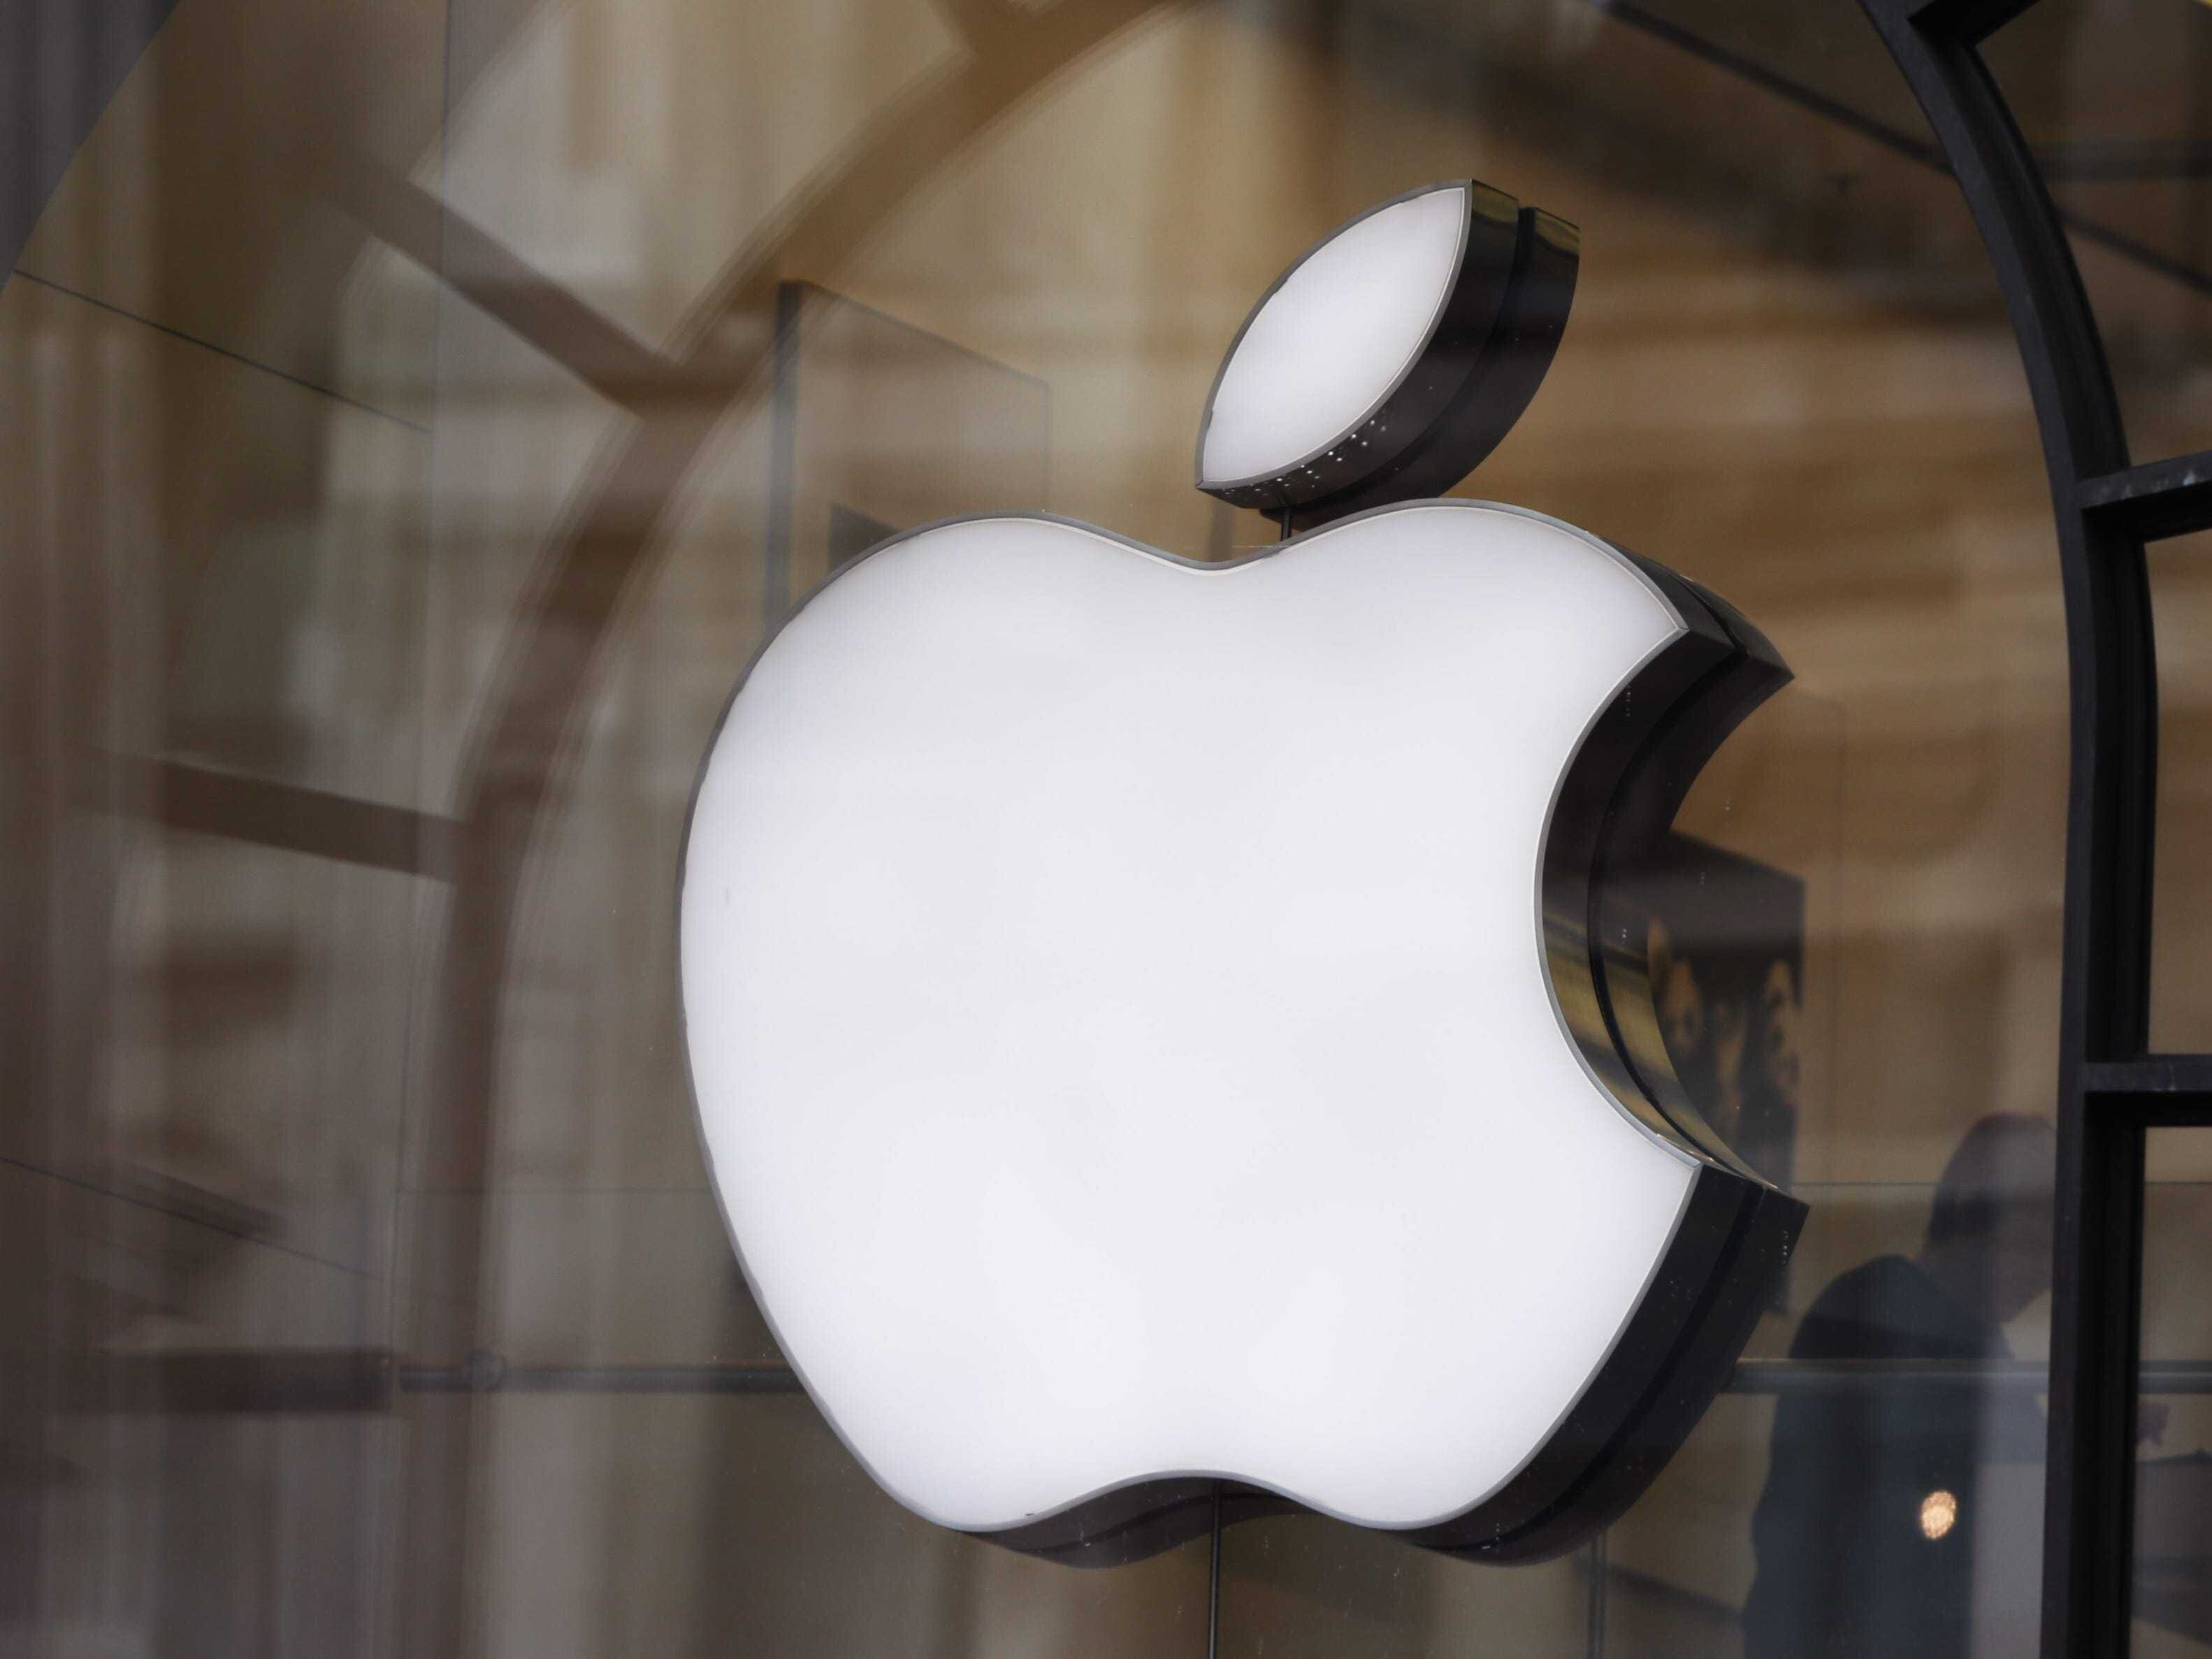 EU regulators accuse Apple of breaching digital competition rules for app stores